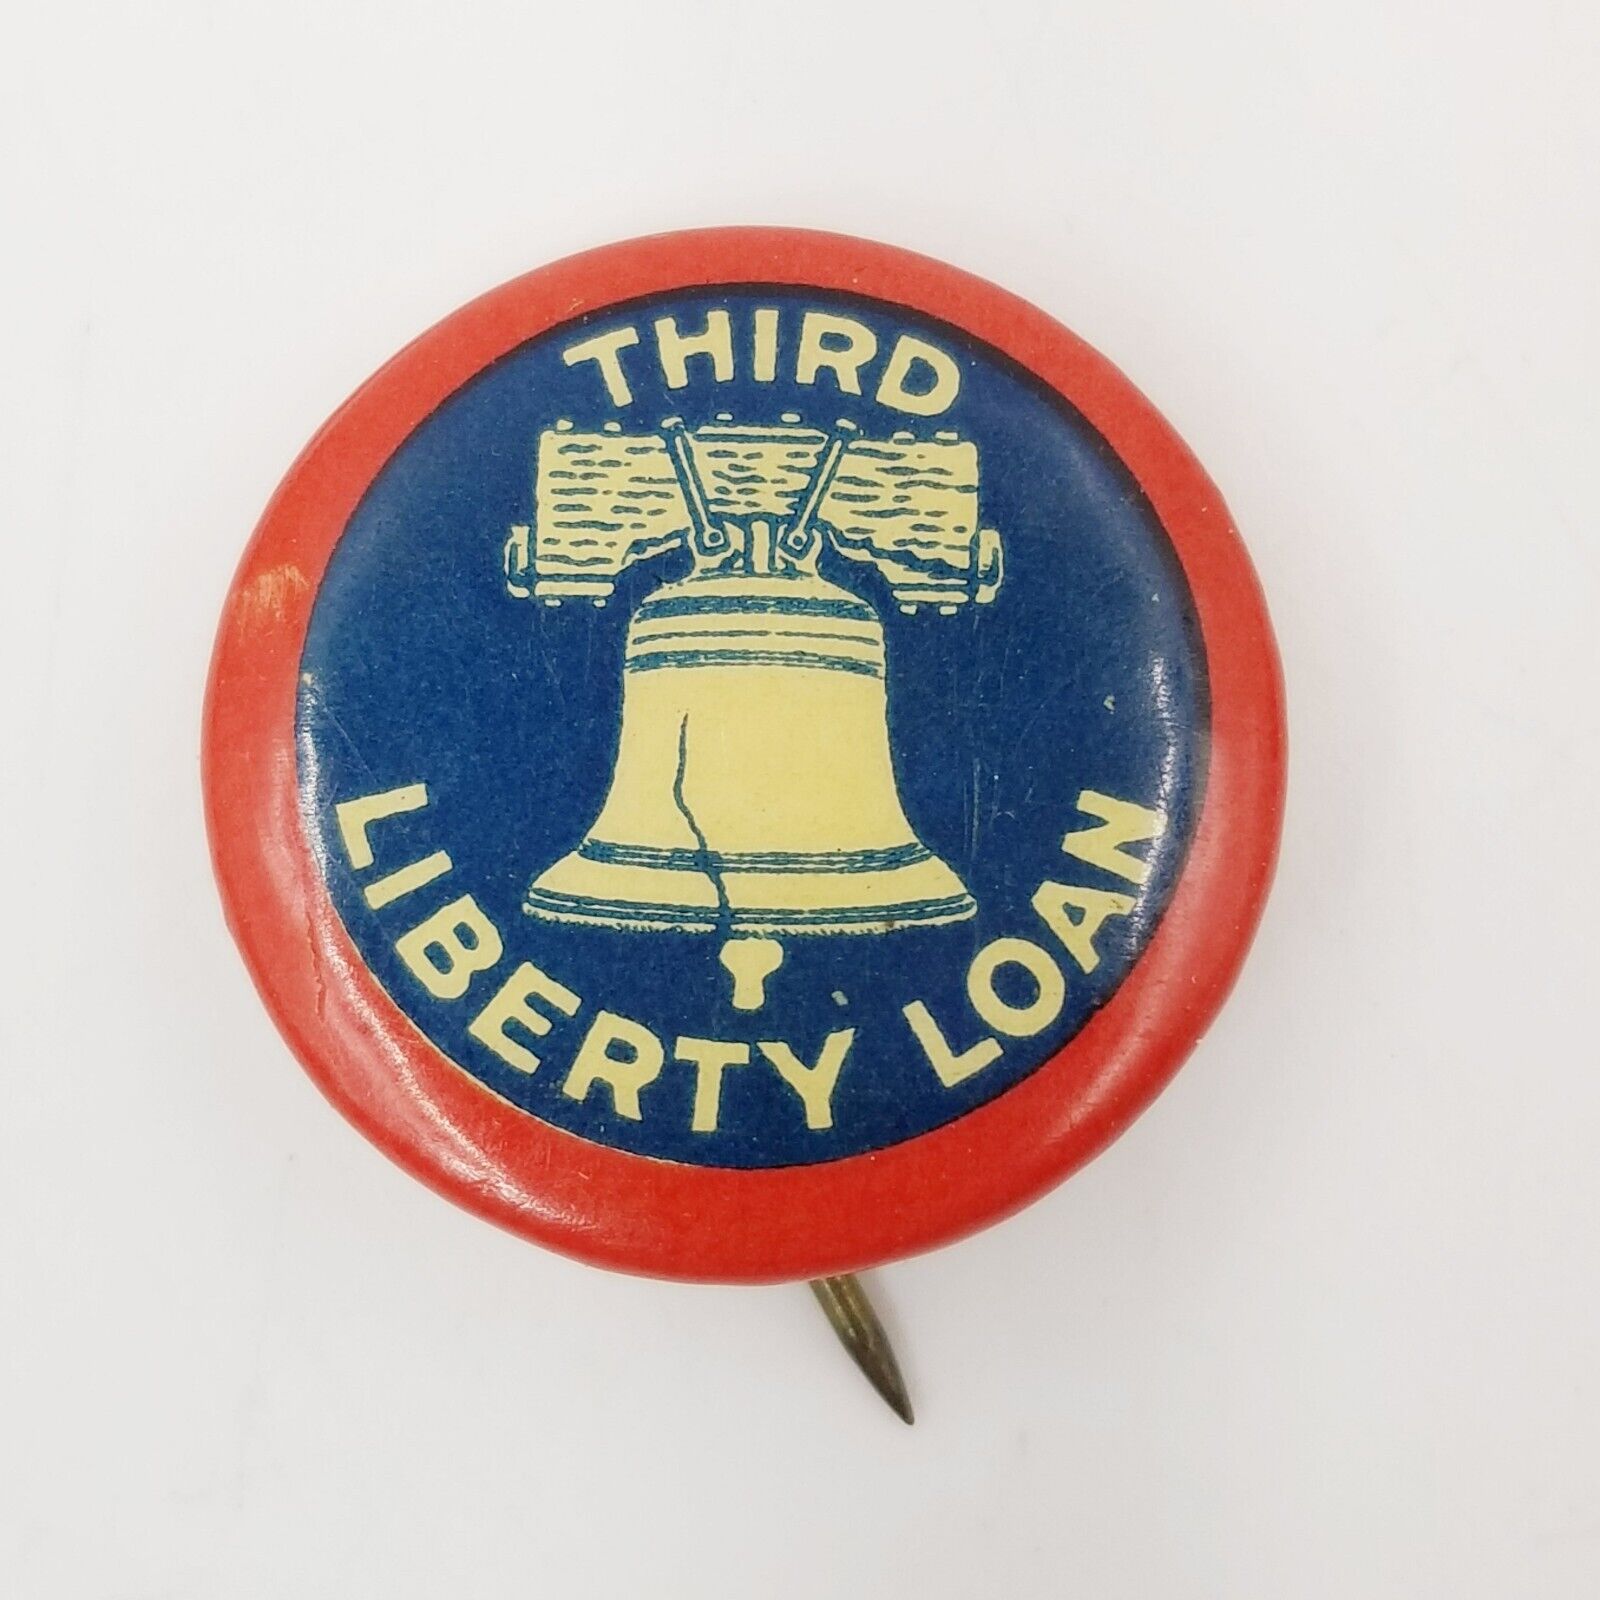 Vintage THIRD LIBERTY LOAN Red White & Blue pin app. 1918 Liberty Loan Acts WWII